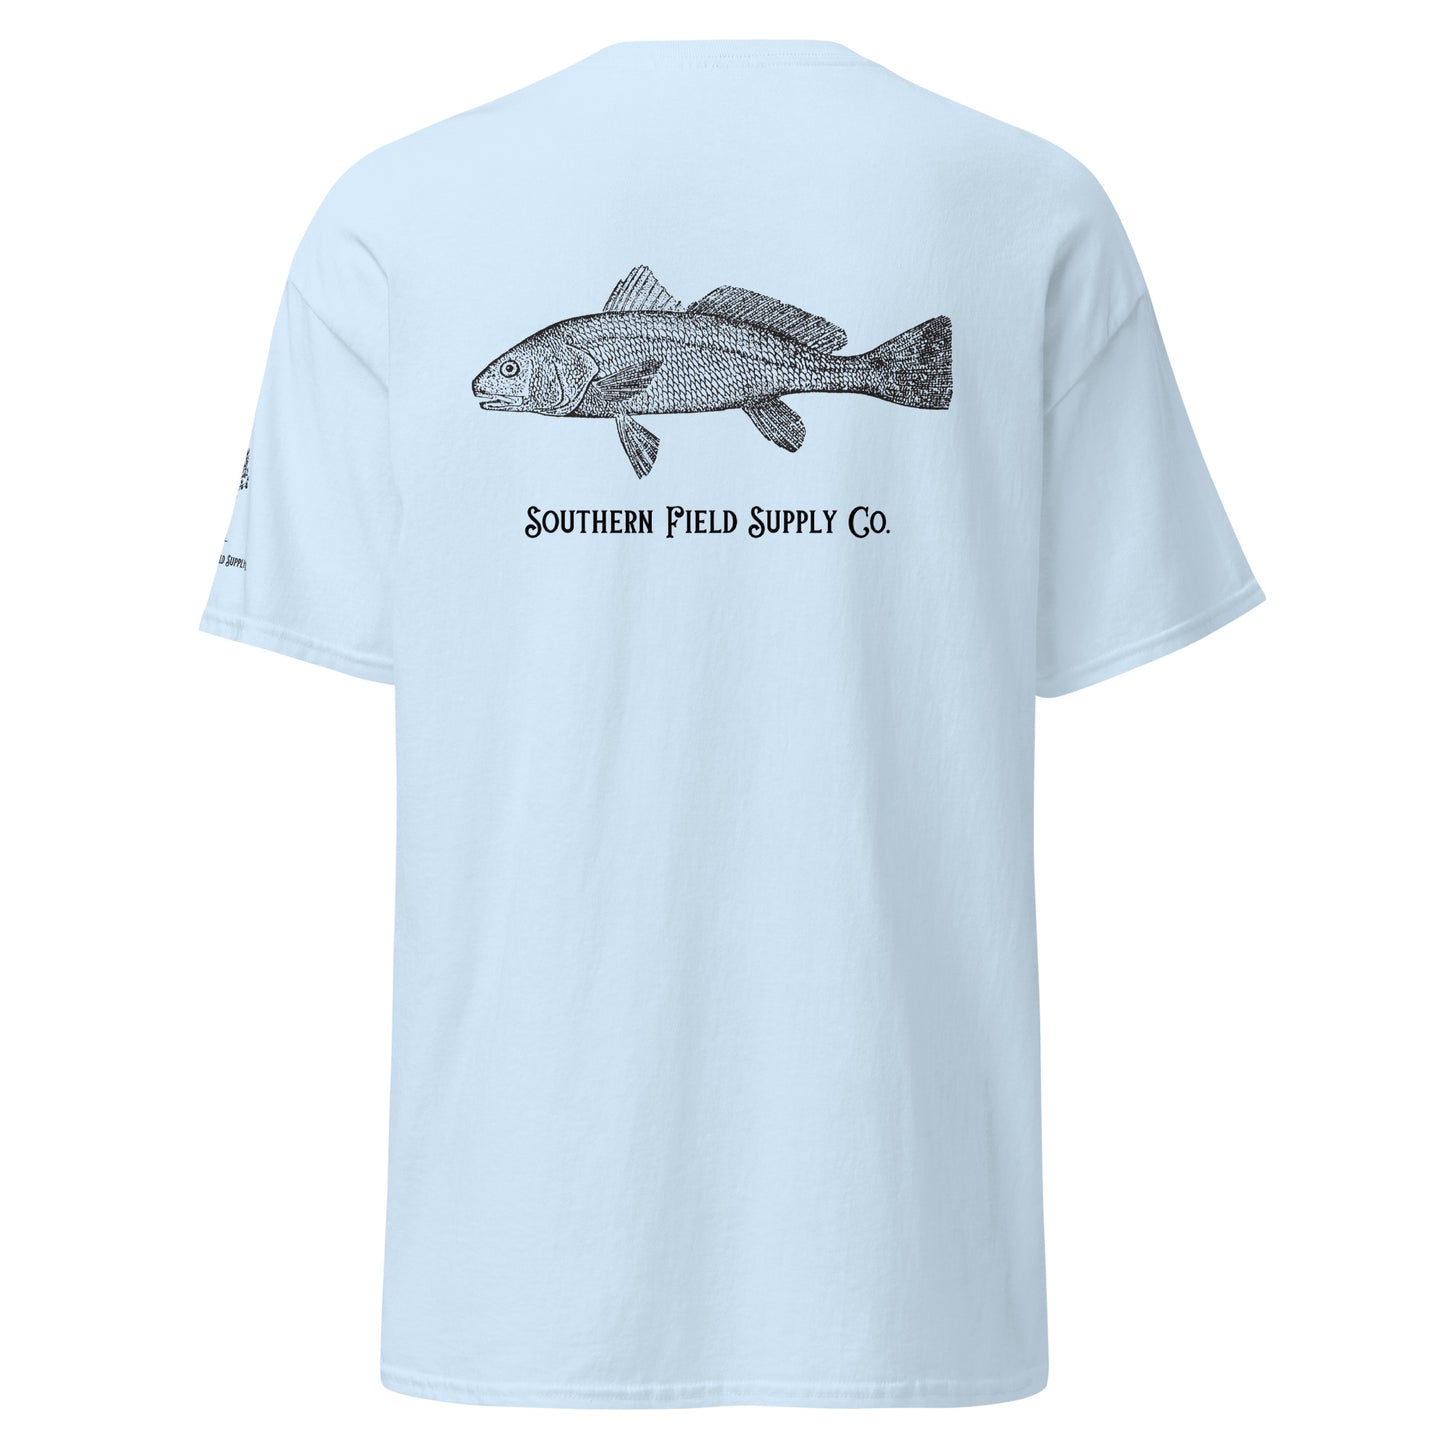 Red Drum Southern Field Supply Tee - red fish - fishermen - gift - for him - outdoors